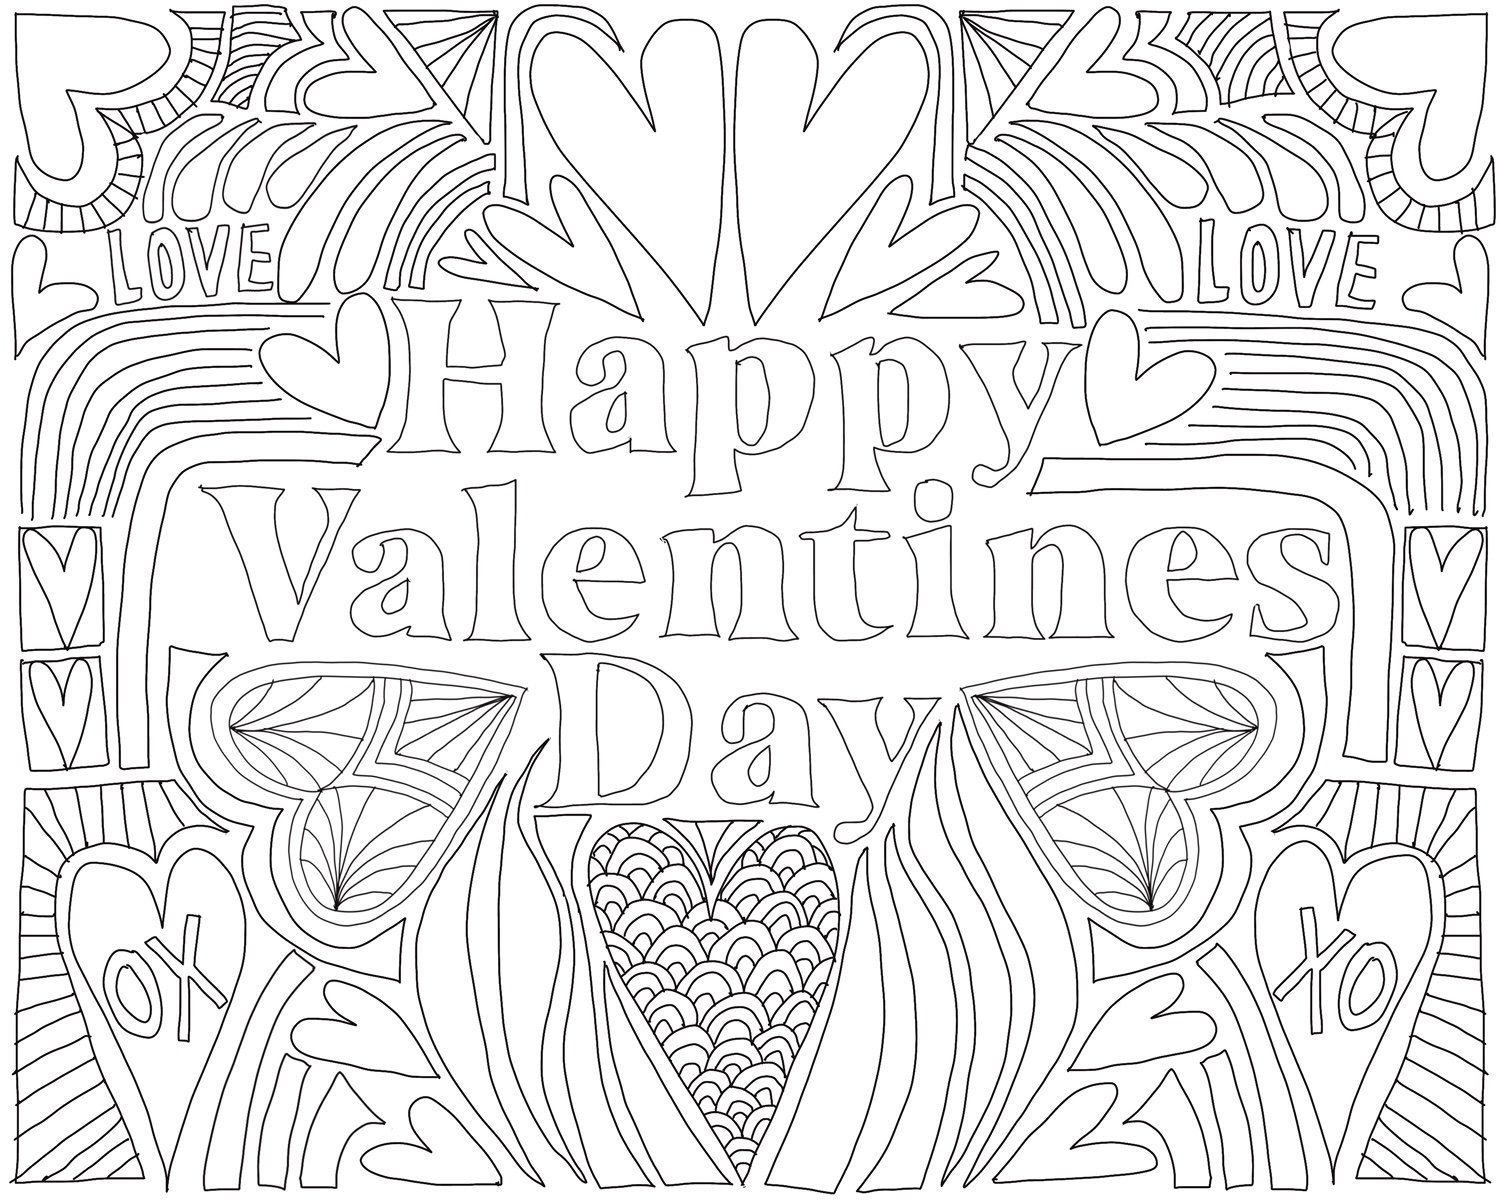 Free coloring pages for all ages â swallowfield